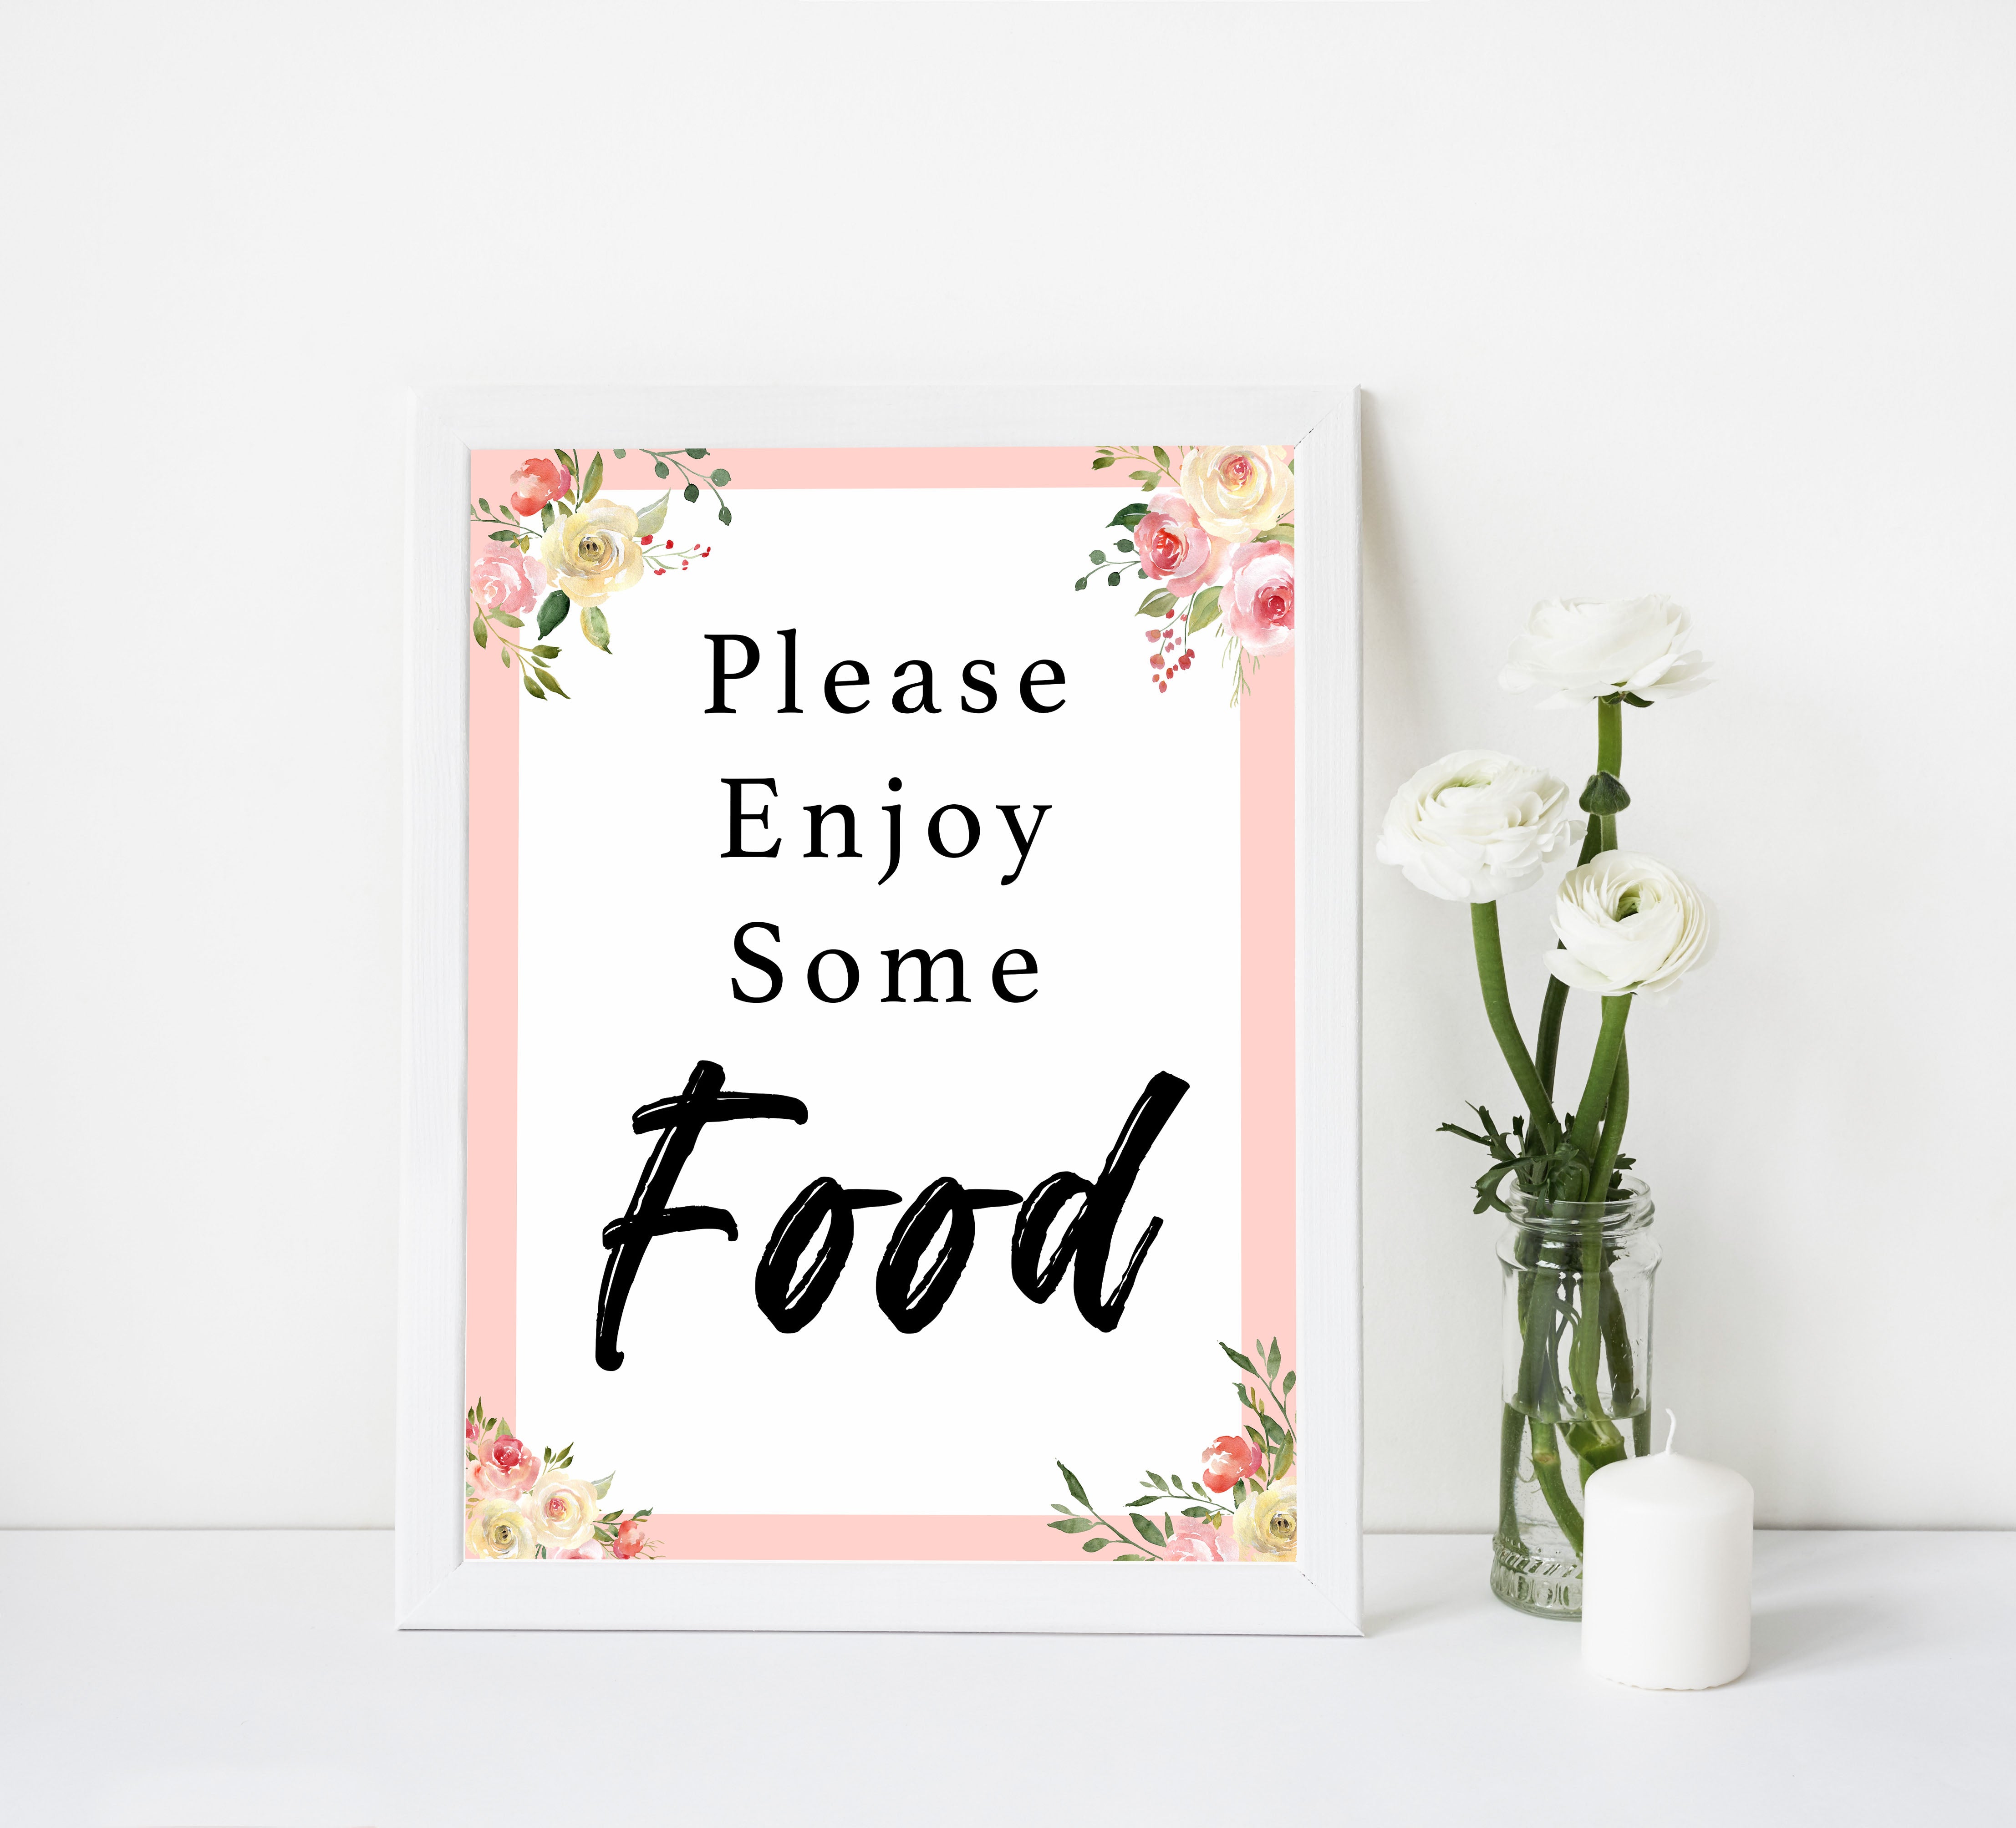 Food baby signs, food baby table decor, Spring floral baby decor, printable baby table signs, printable baby decor, floral table signs, fun baby signs, fun baby table signs